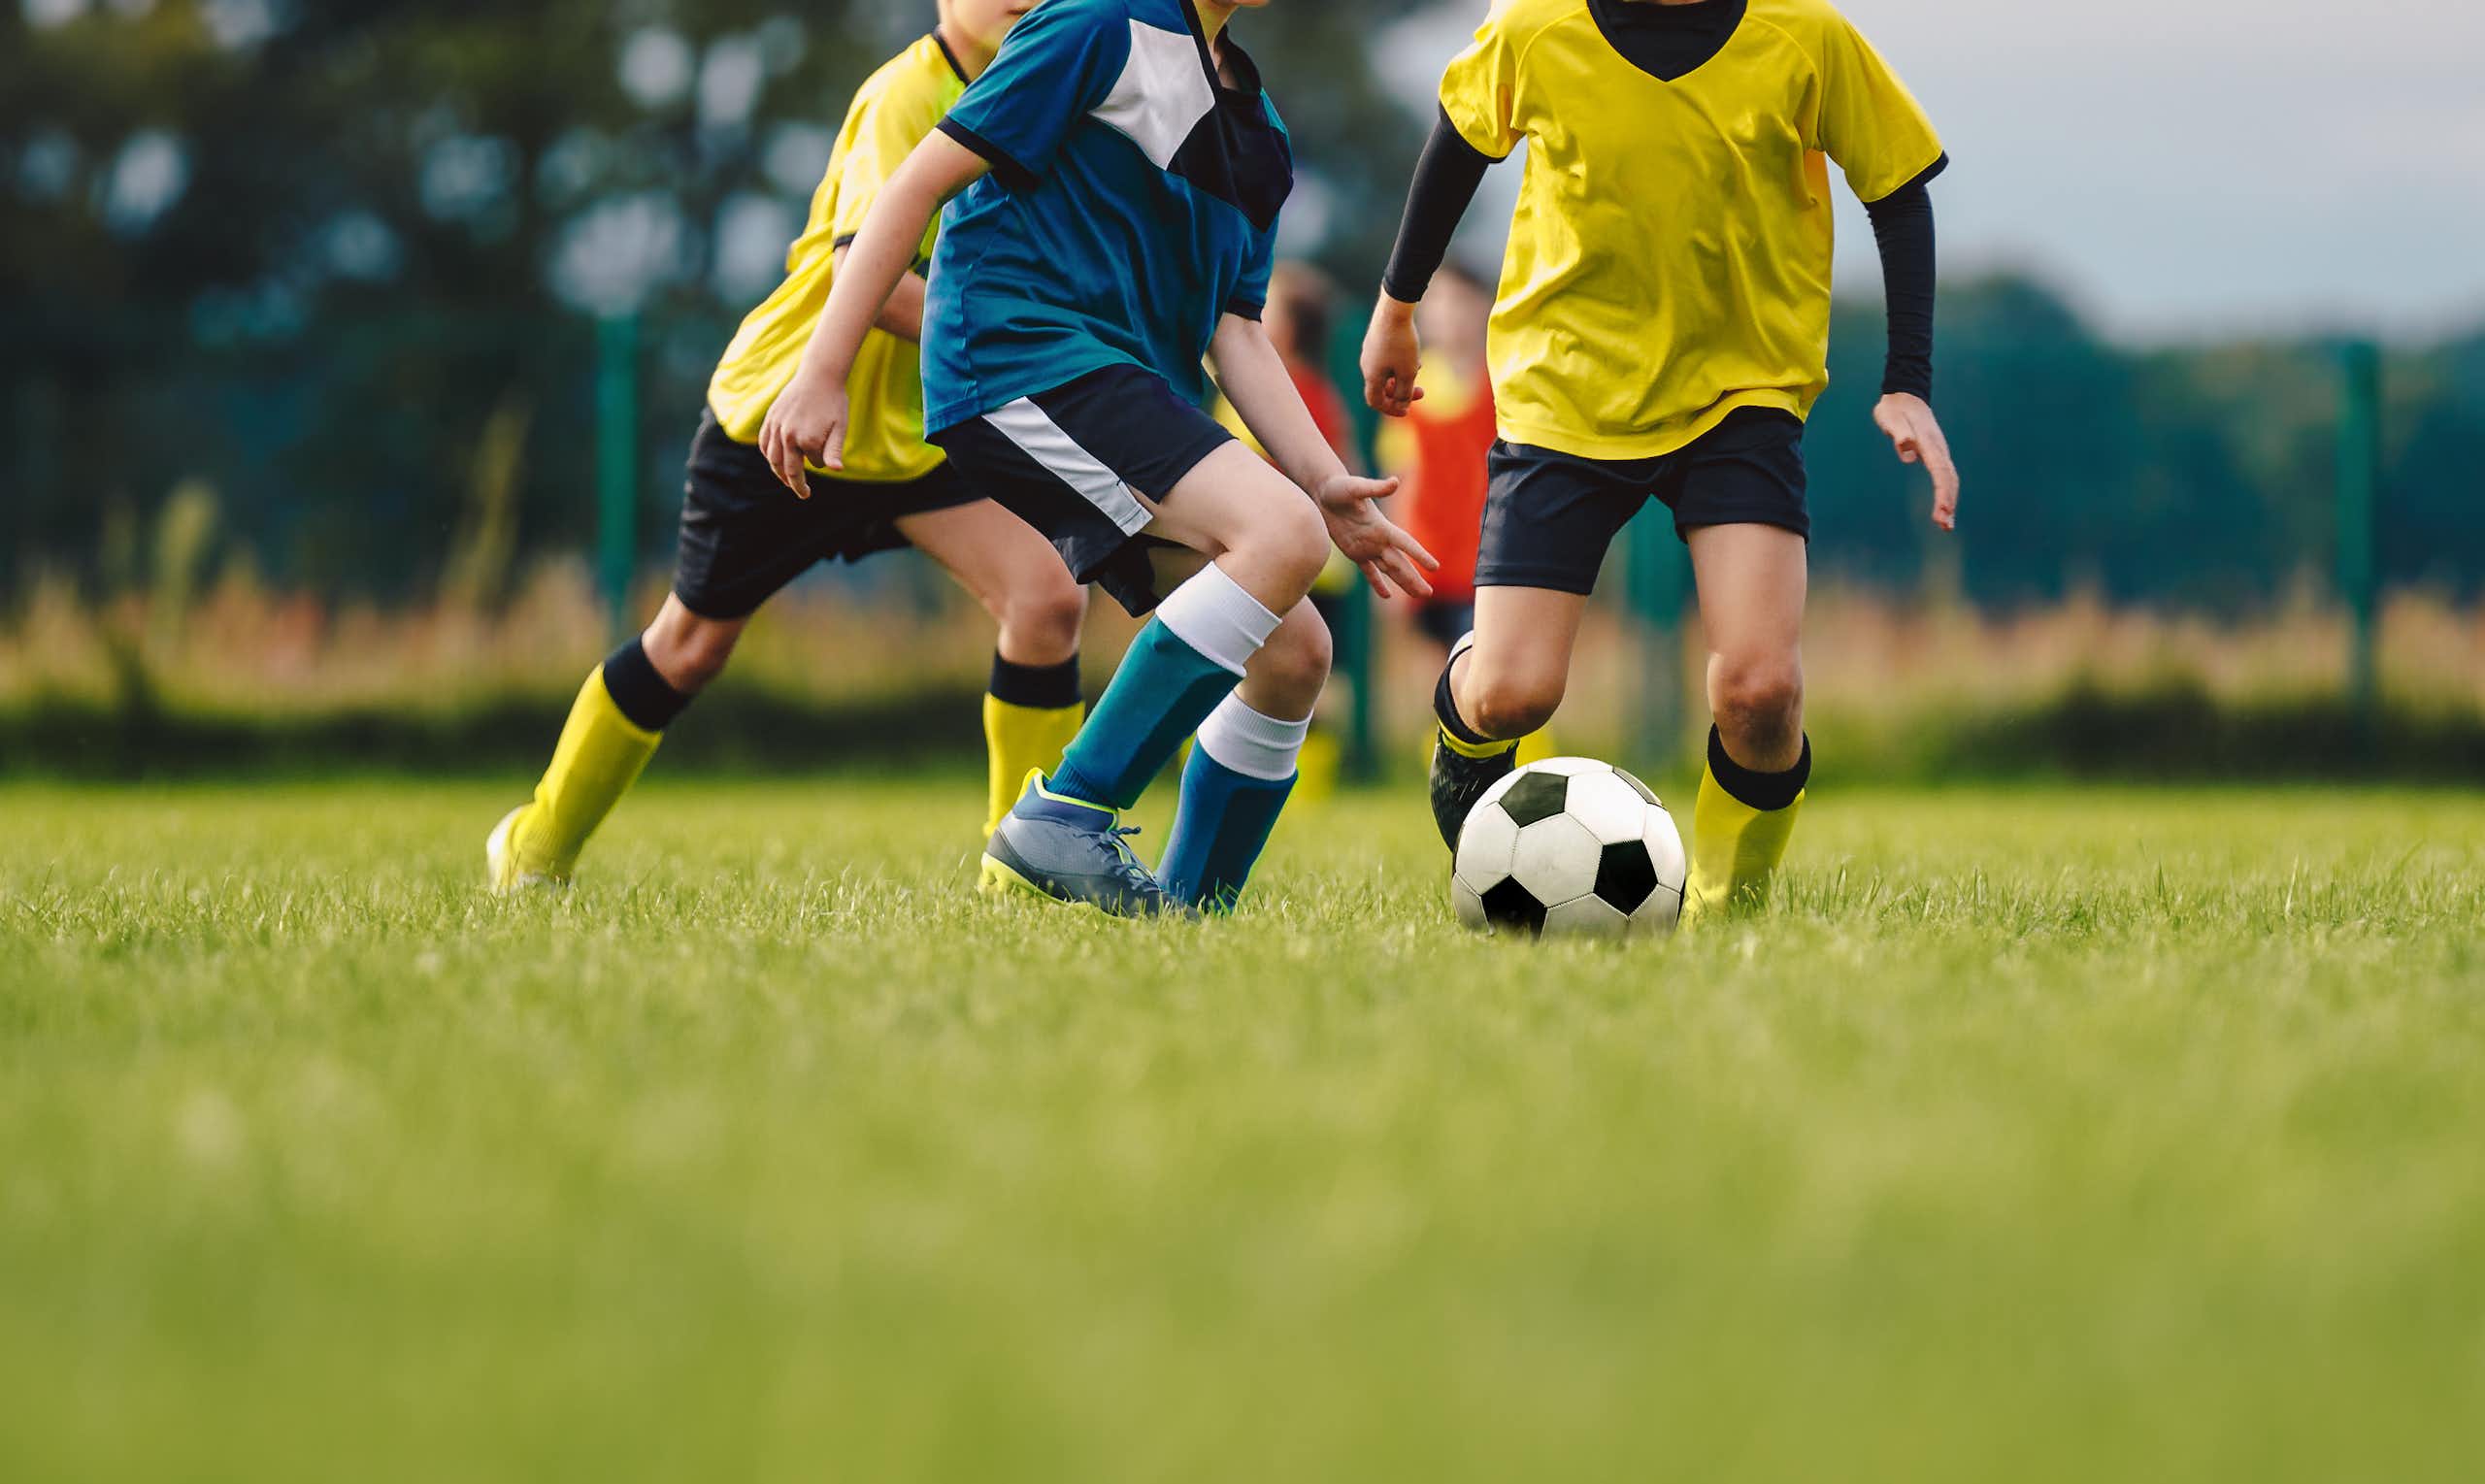 Children, seen from the neck down, kick a soccer ball on a grassy field while wearing soccer uniforms